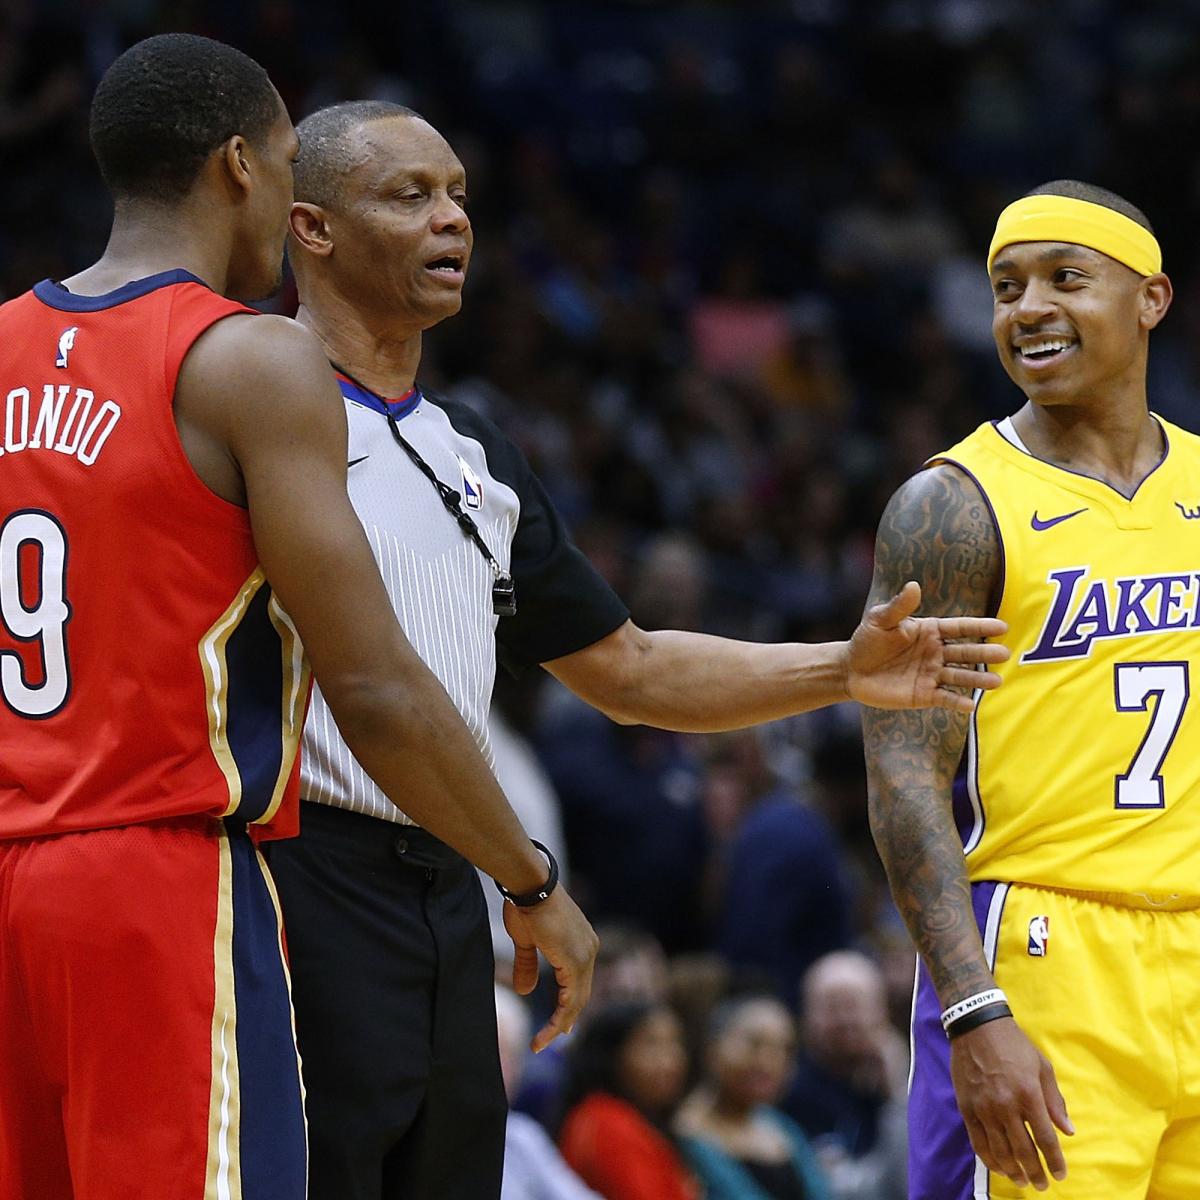 Why Does Rajon Rondo Have so Much Beef with Isaiah Thomas? | Bleacher Report | Latest ...